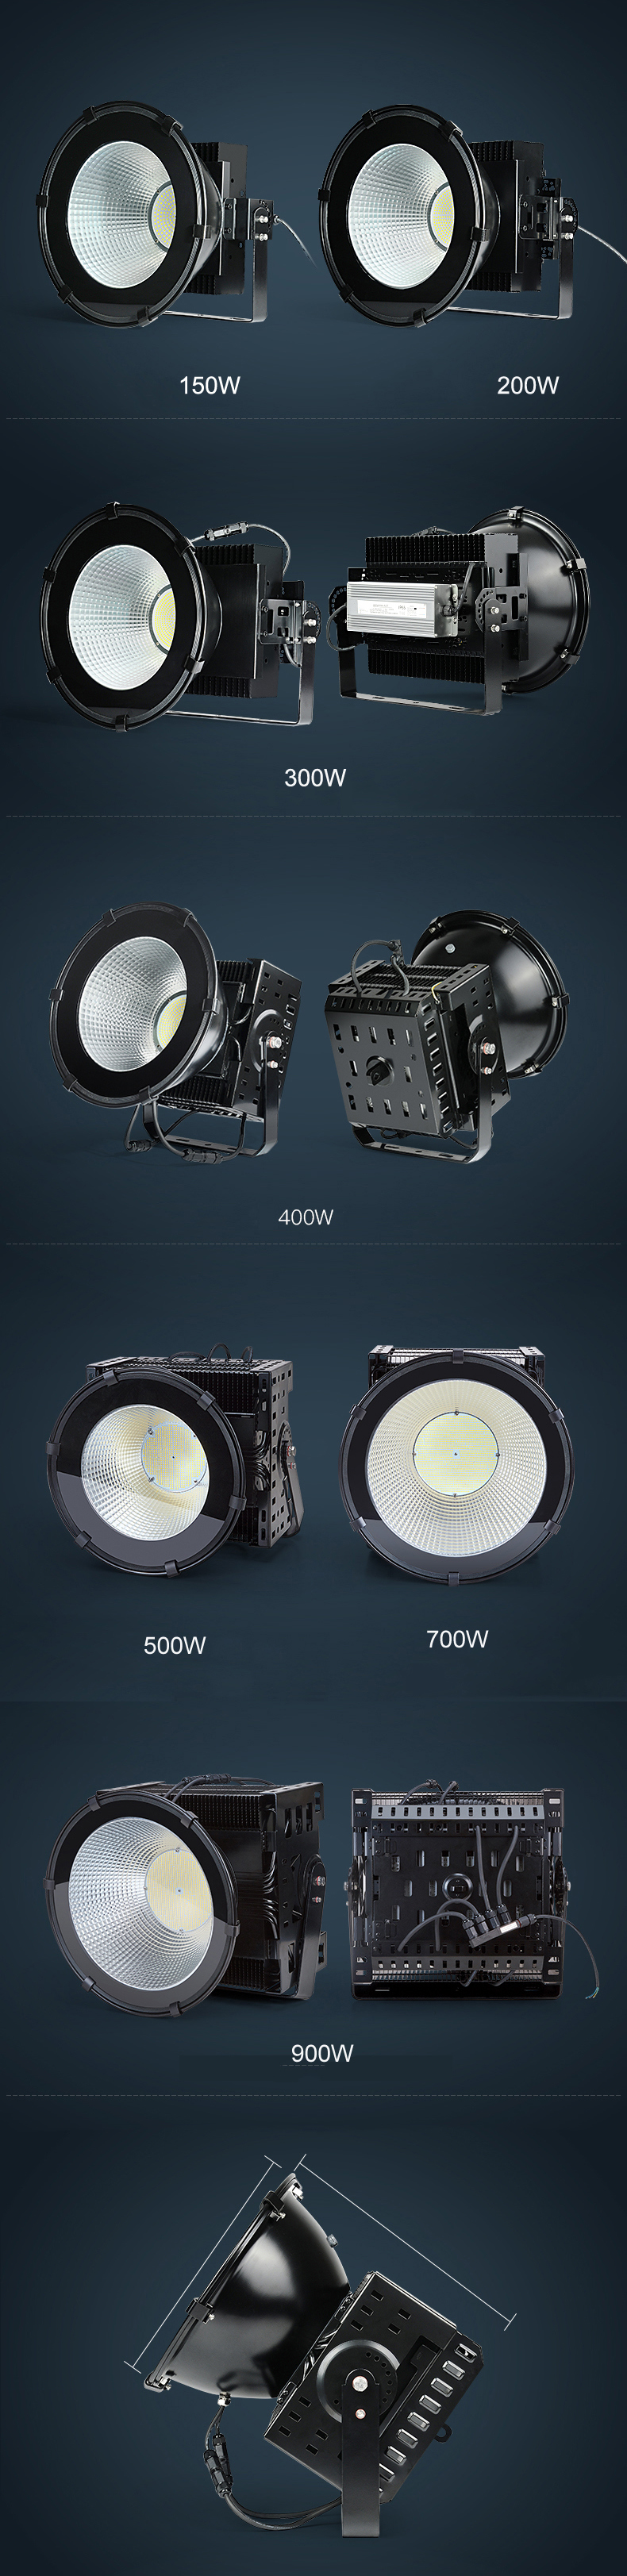 2018 More Powerfull Meanwell 5 Years 900W LED Flood Light for Sport Stadium Engineering